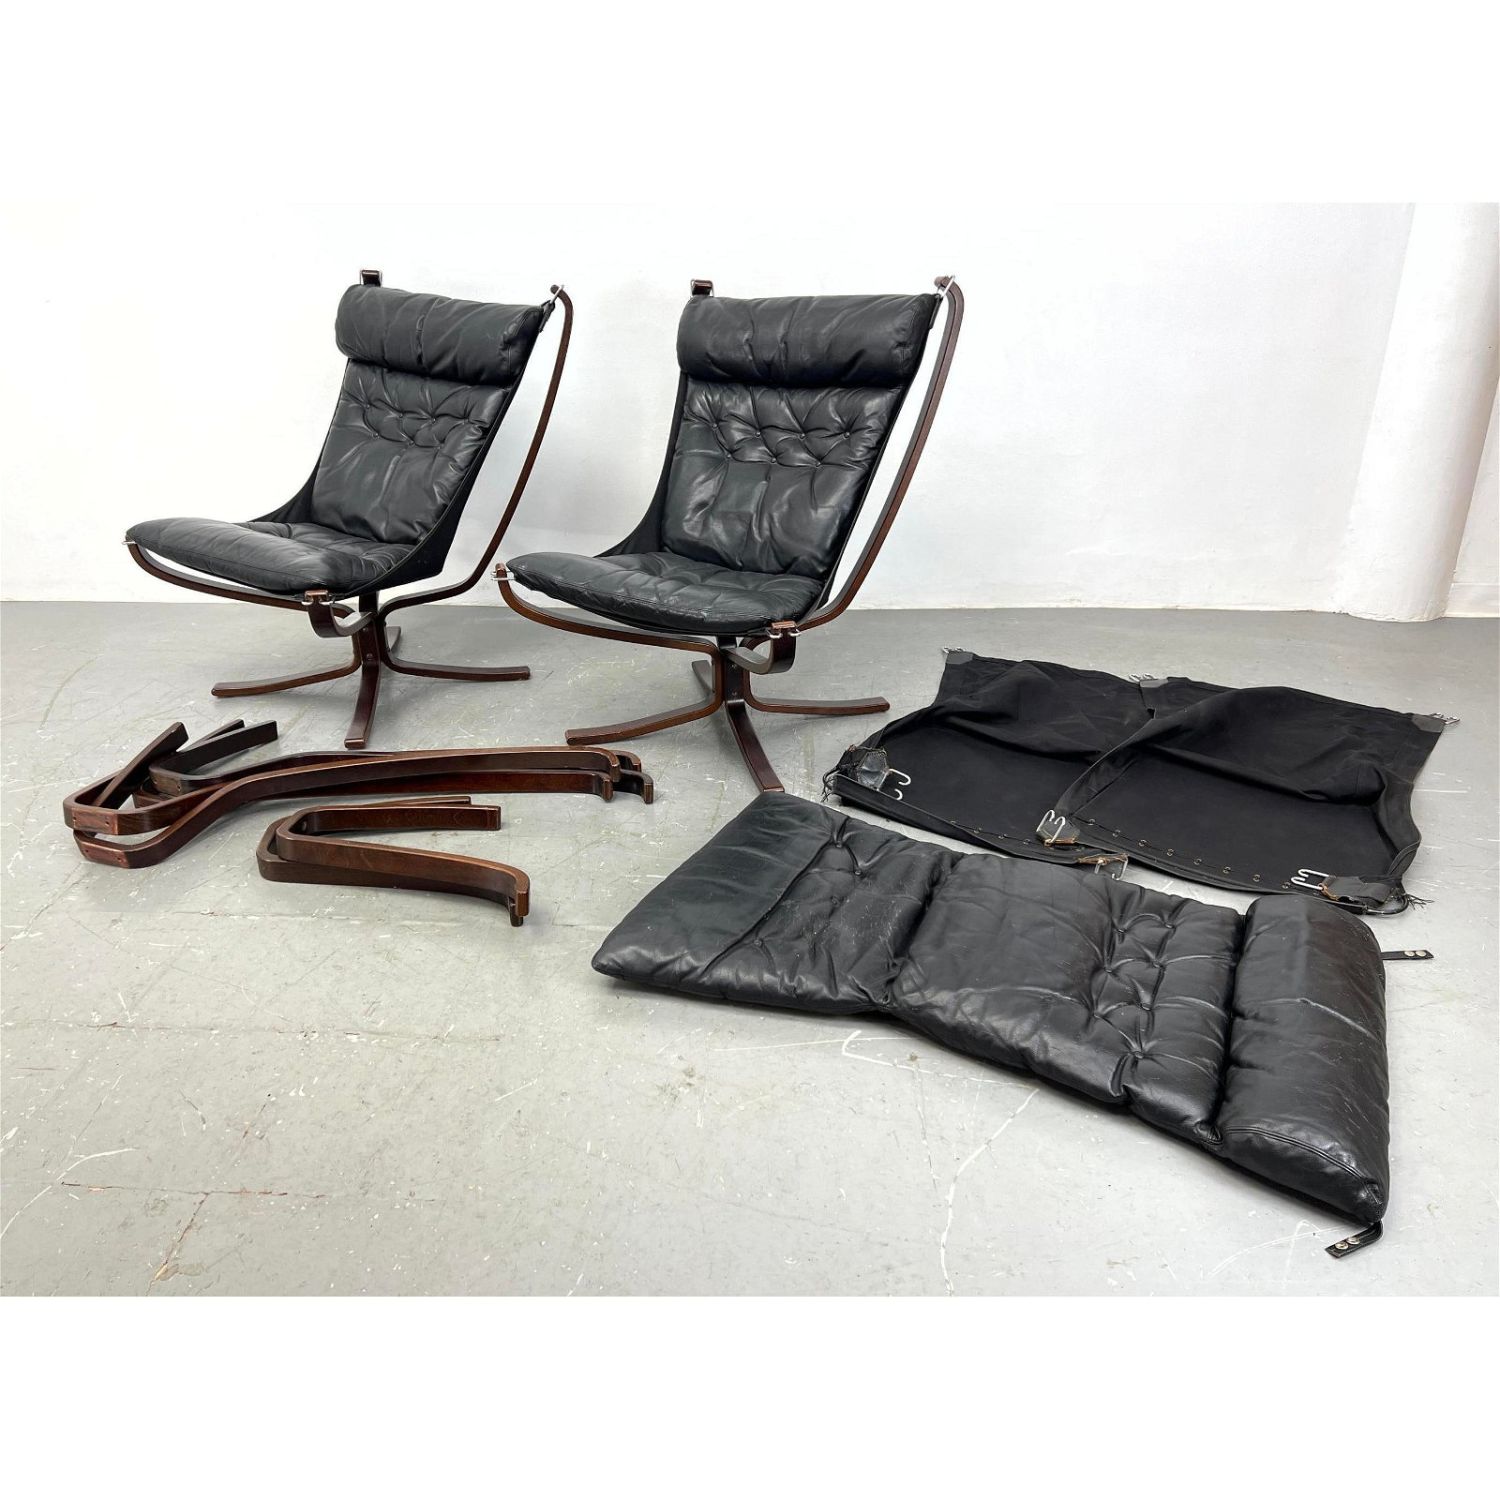 Pr Falcon chairs by SIGURD RUSSELL.